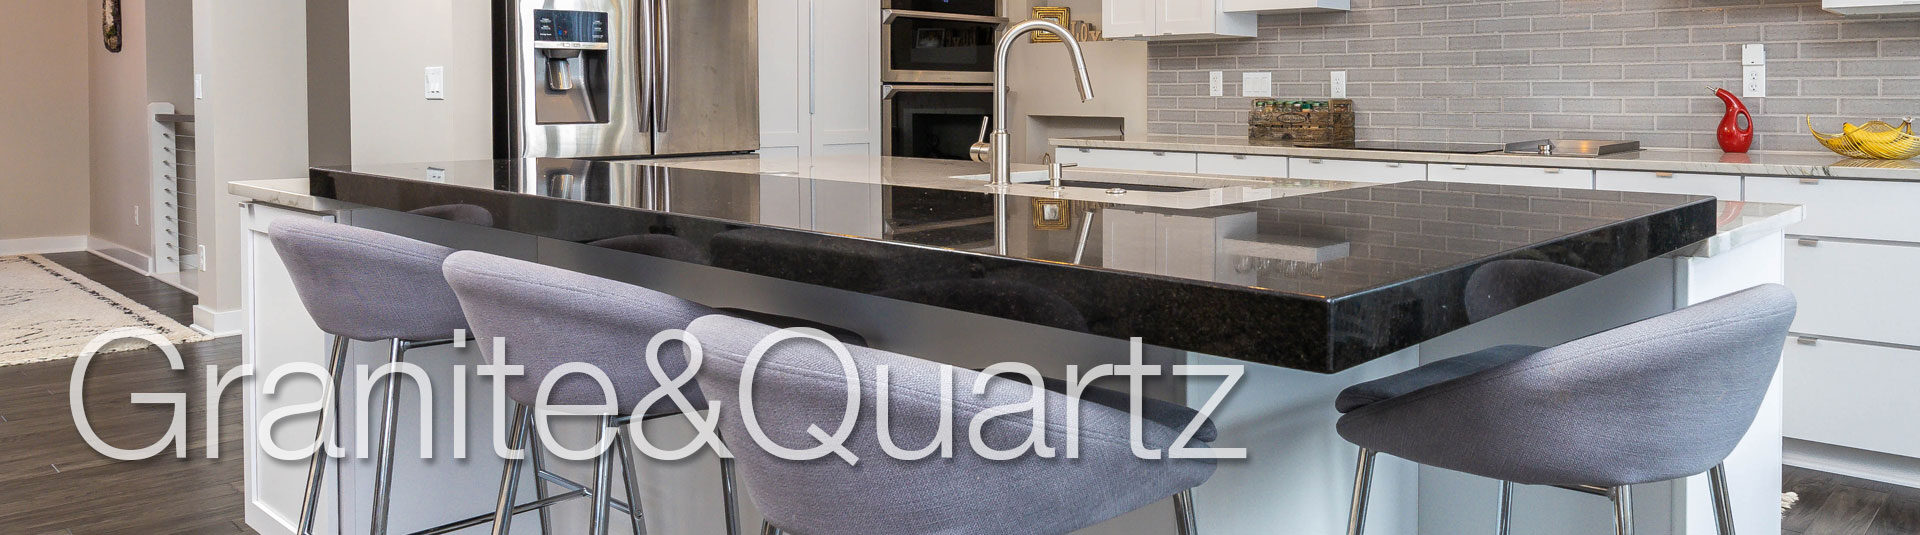 Granite Countertops from Benson Stone Company; superior craftsmanship with a low-price guarantee